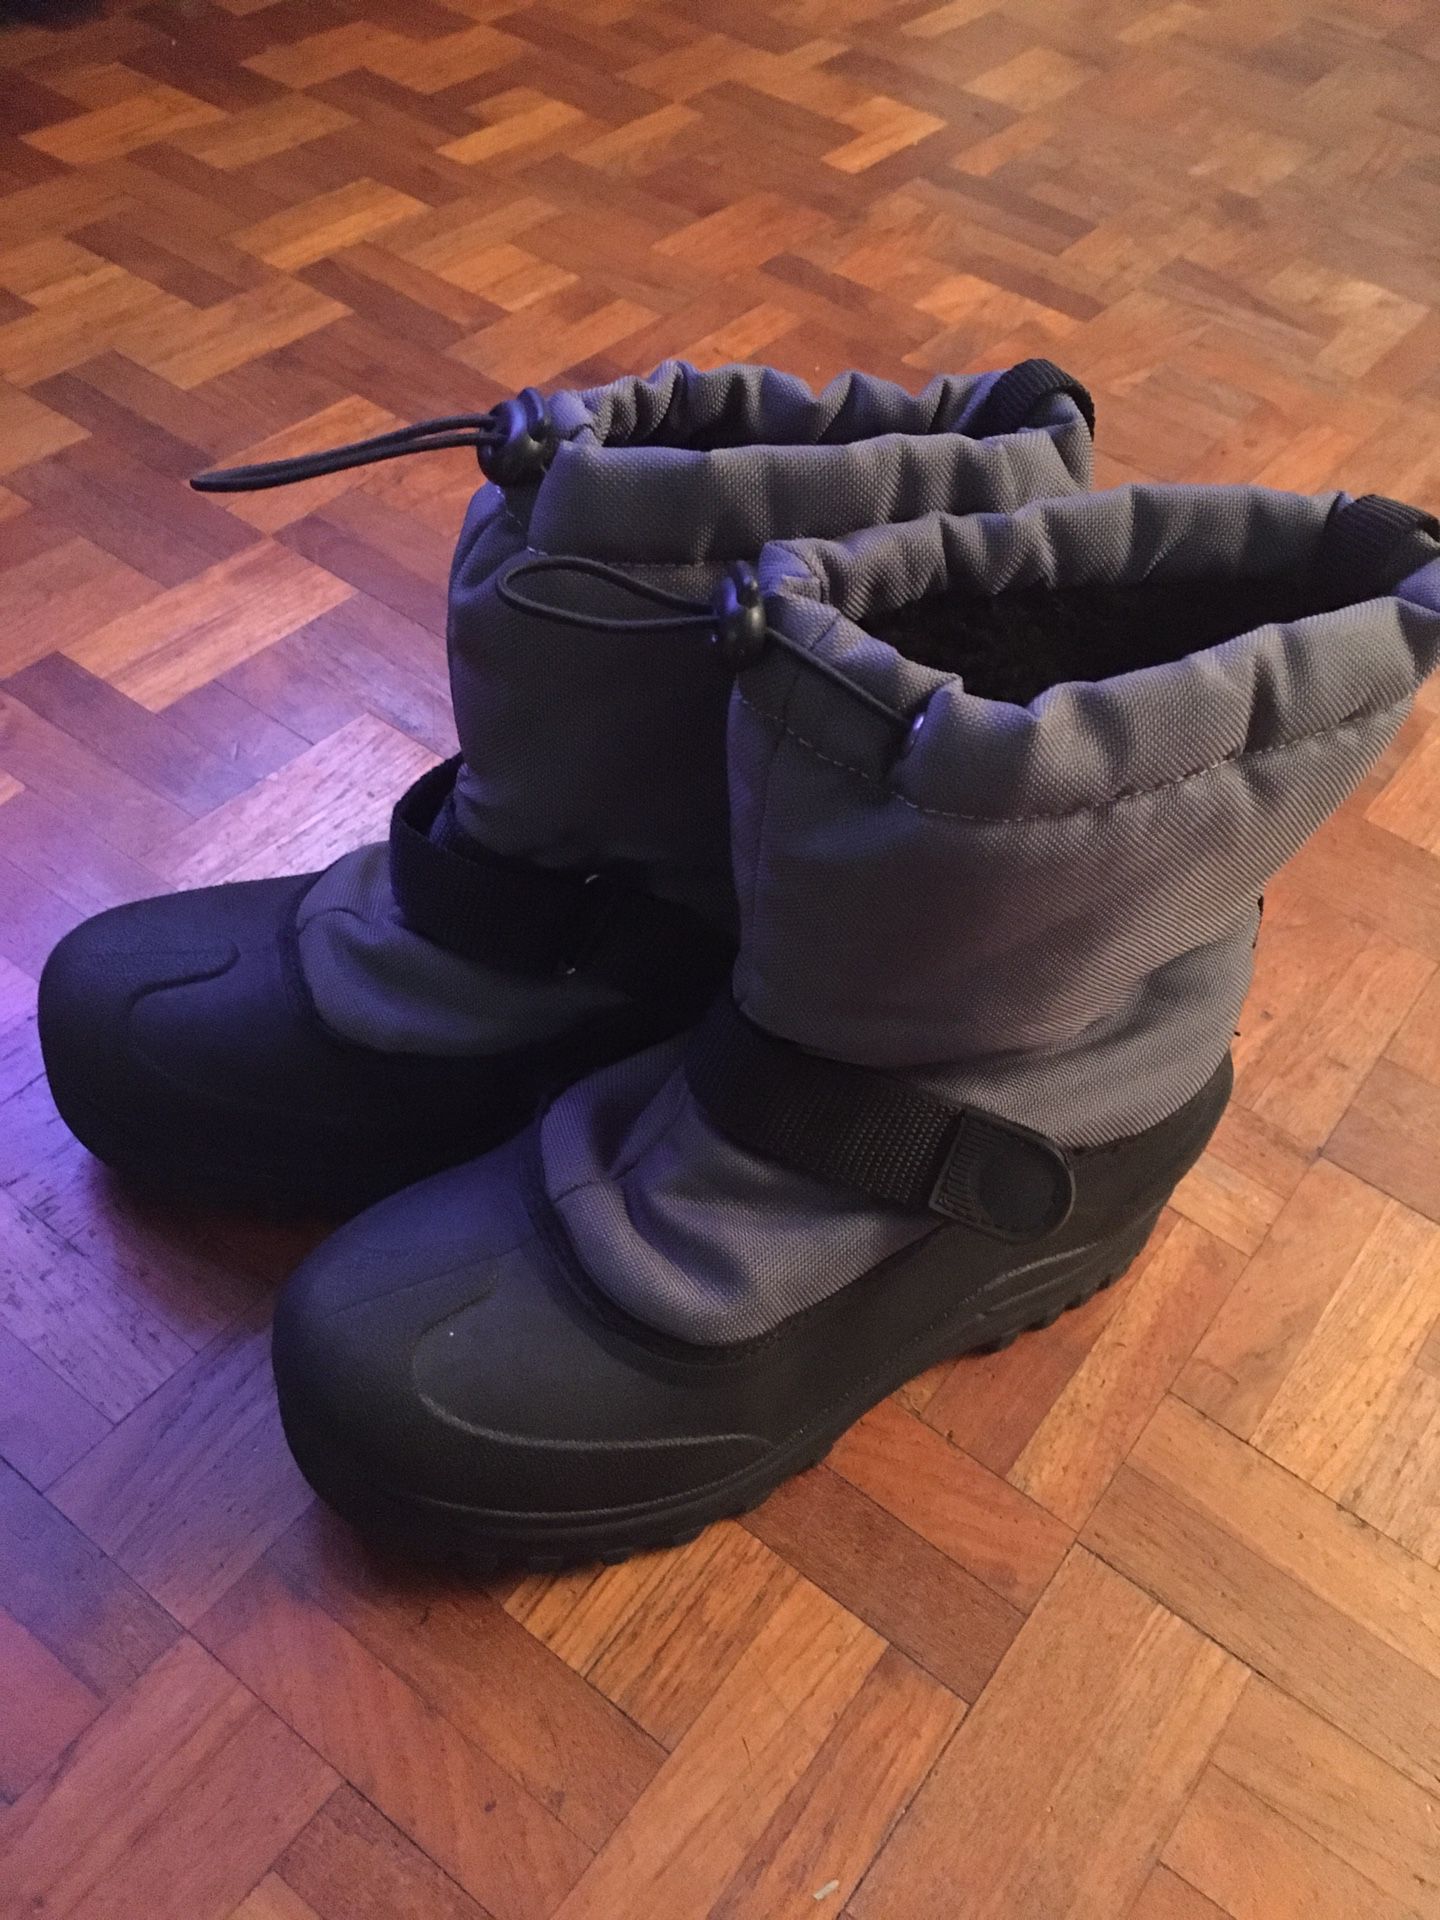 Snow boots, Itasca, Big kids size 4